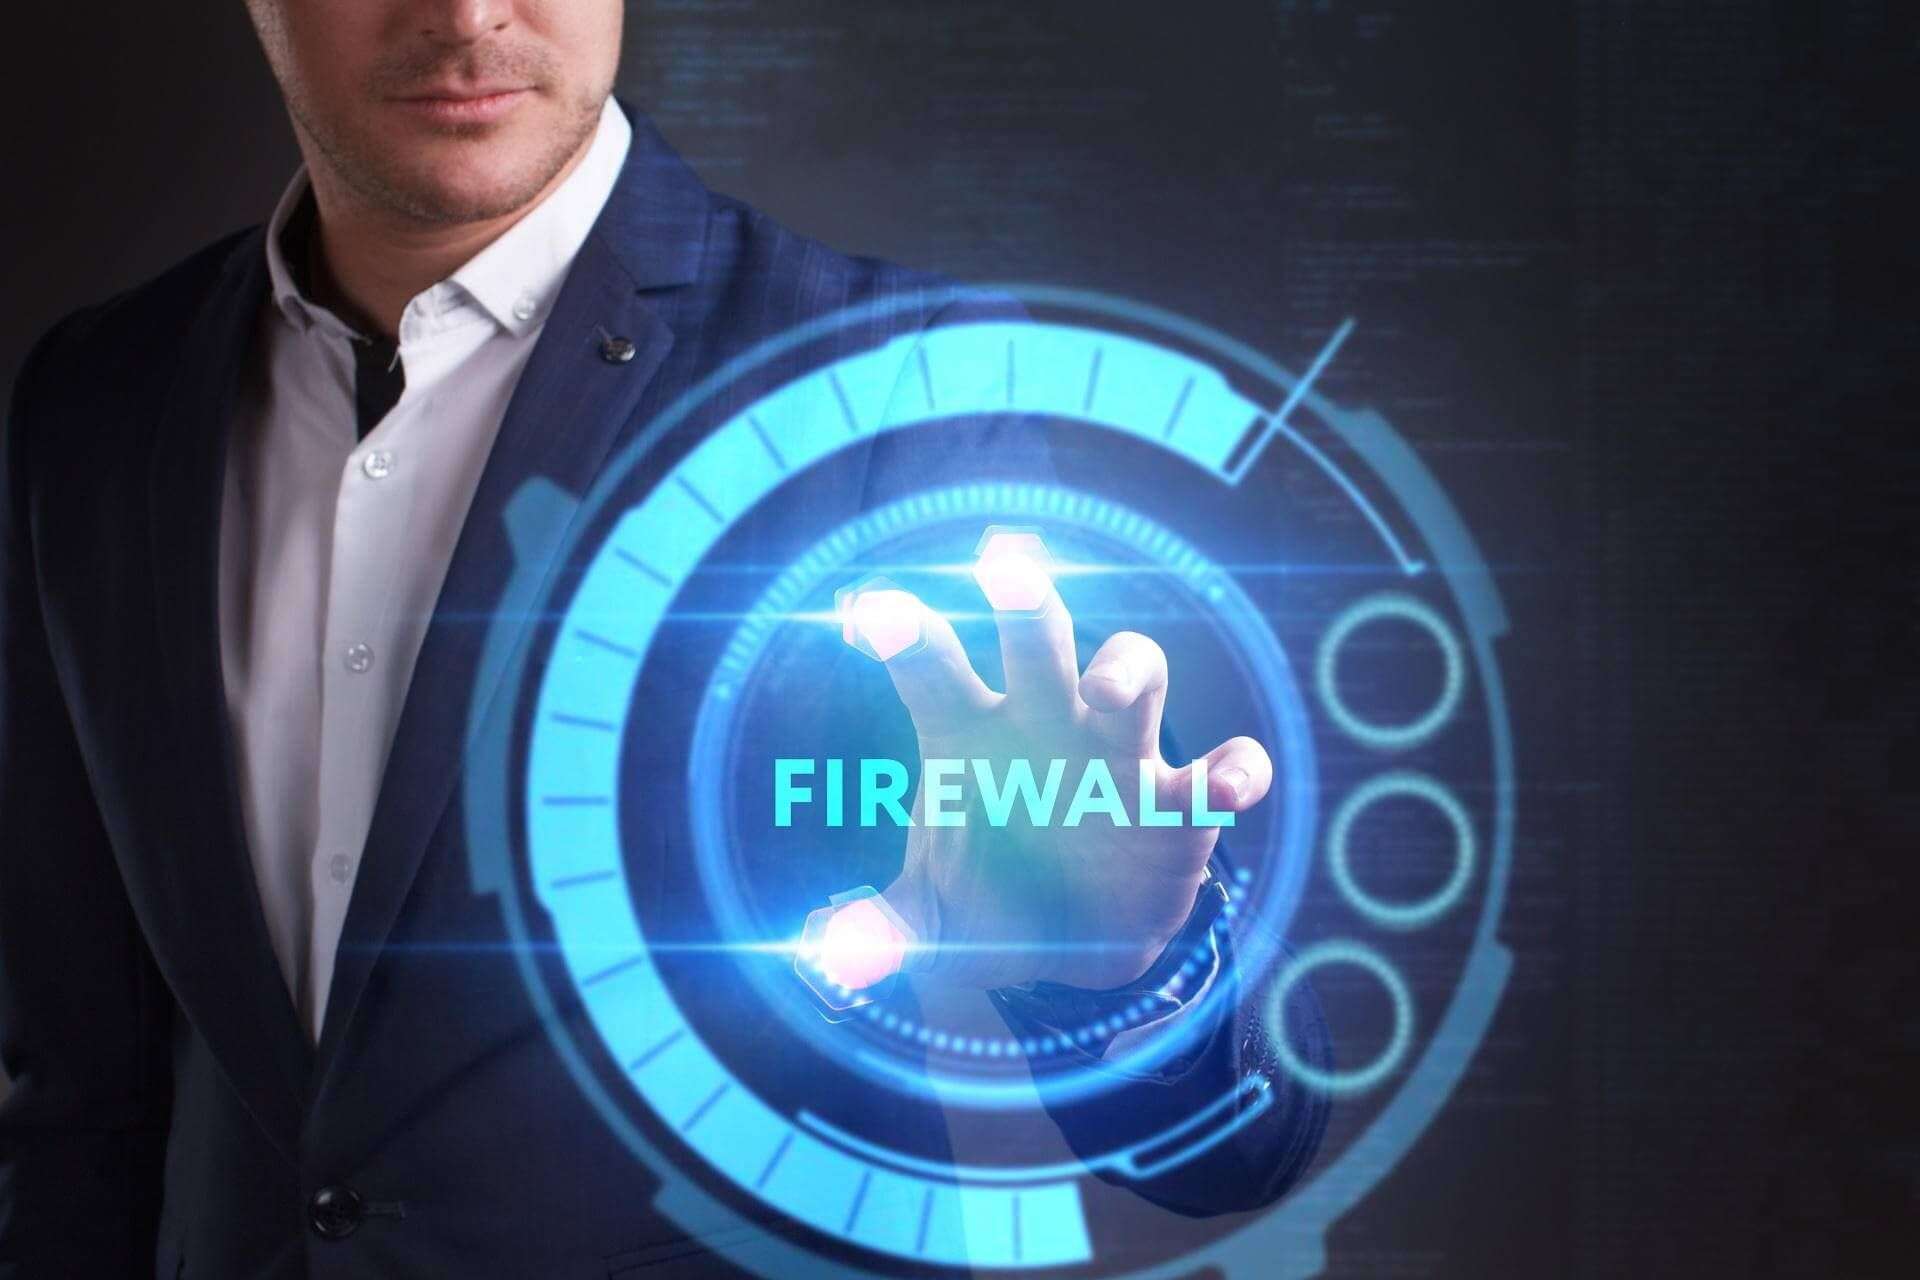 Our team will install and configure a firewall that provides Intrusion Detection and other security features to protect your network.